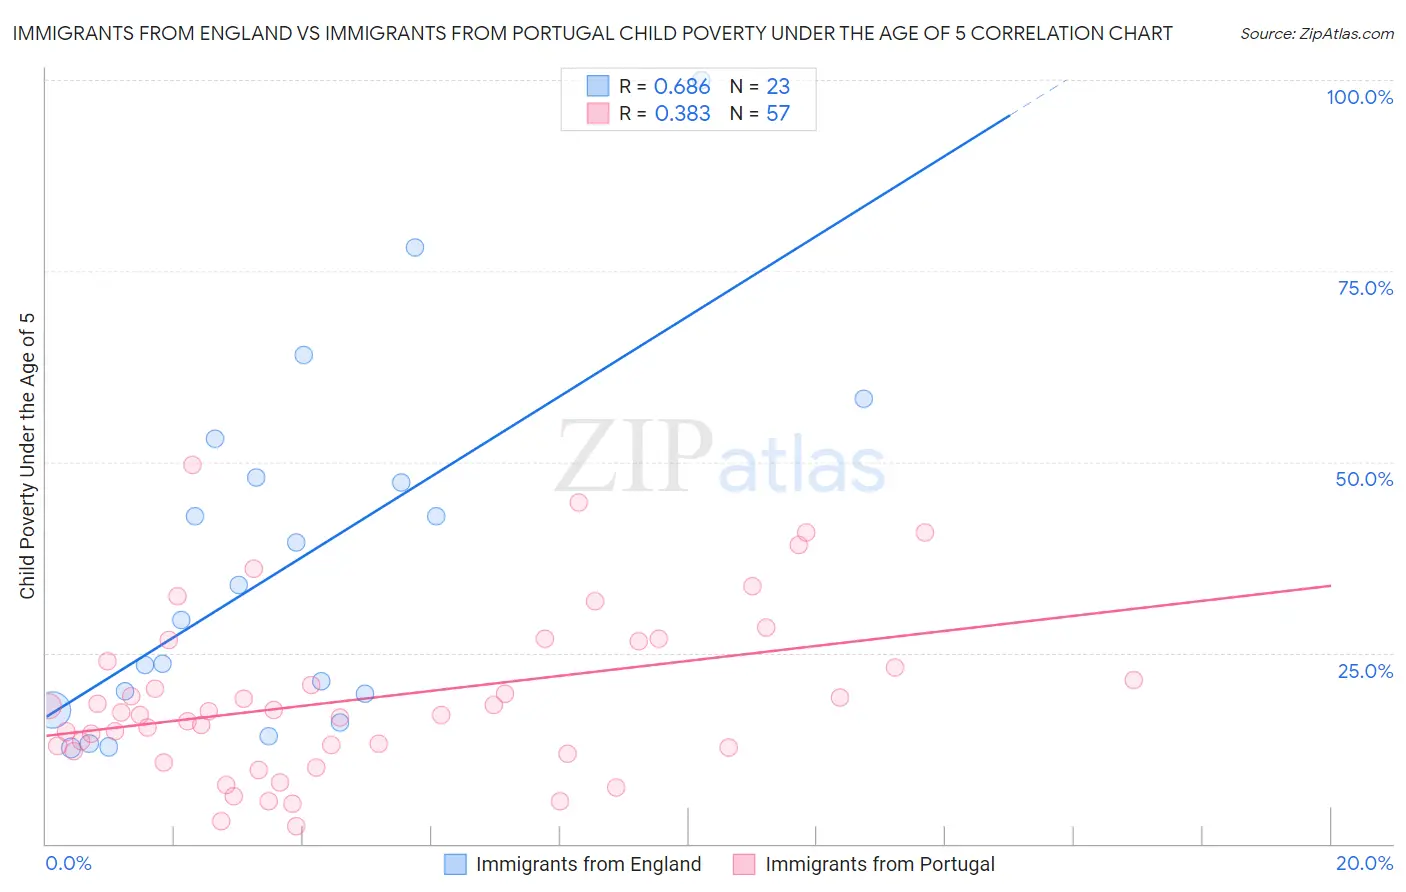 Immigrants from England vs Immigrants from Portugal Child Poverty Under the Age of 5